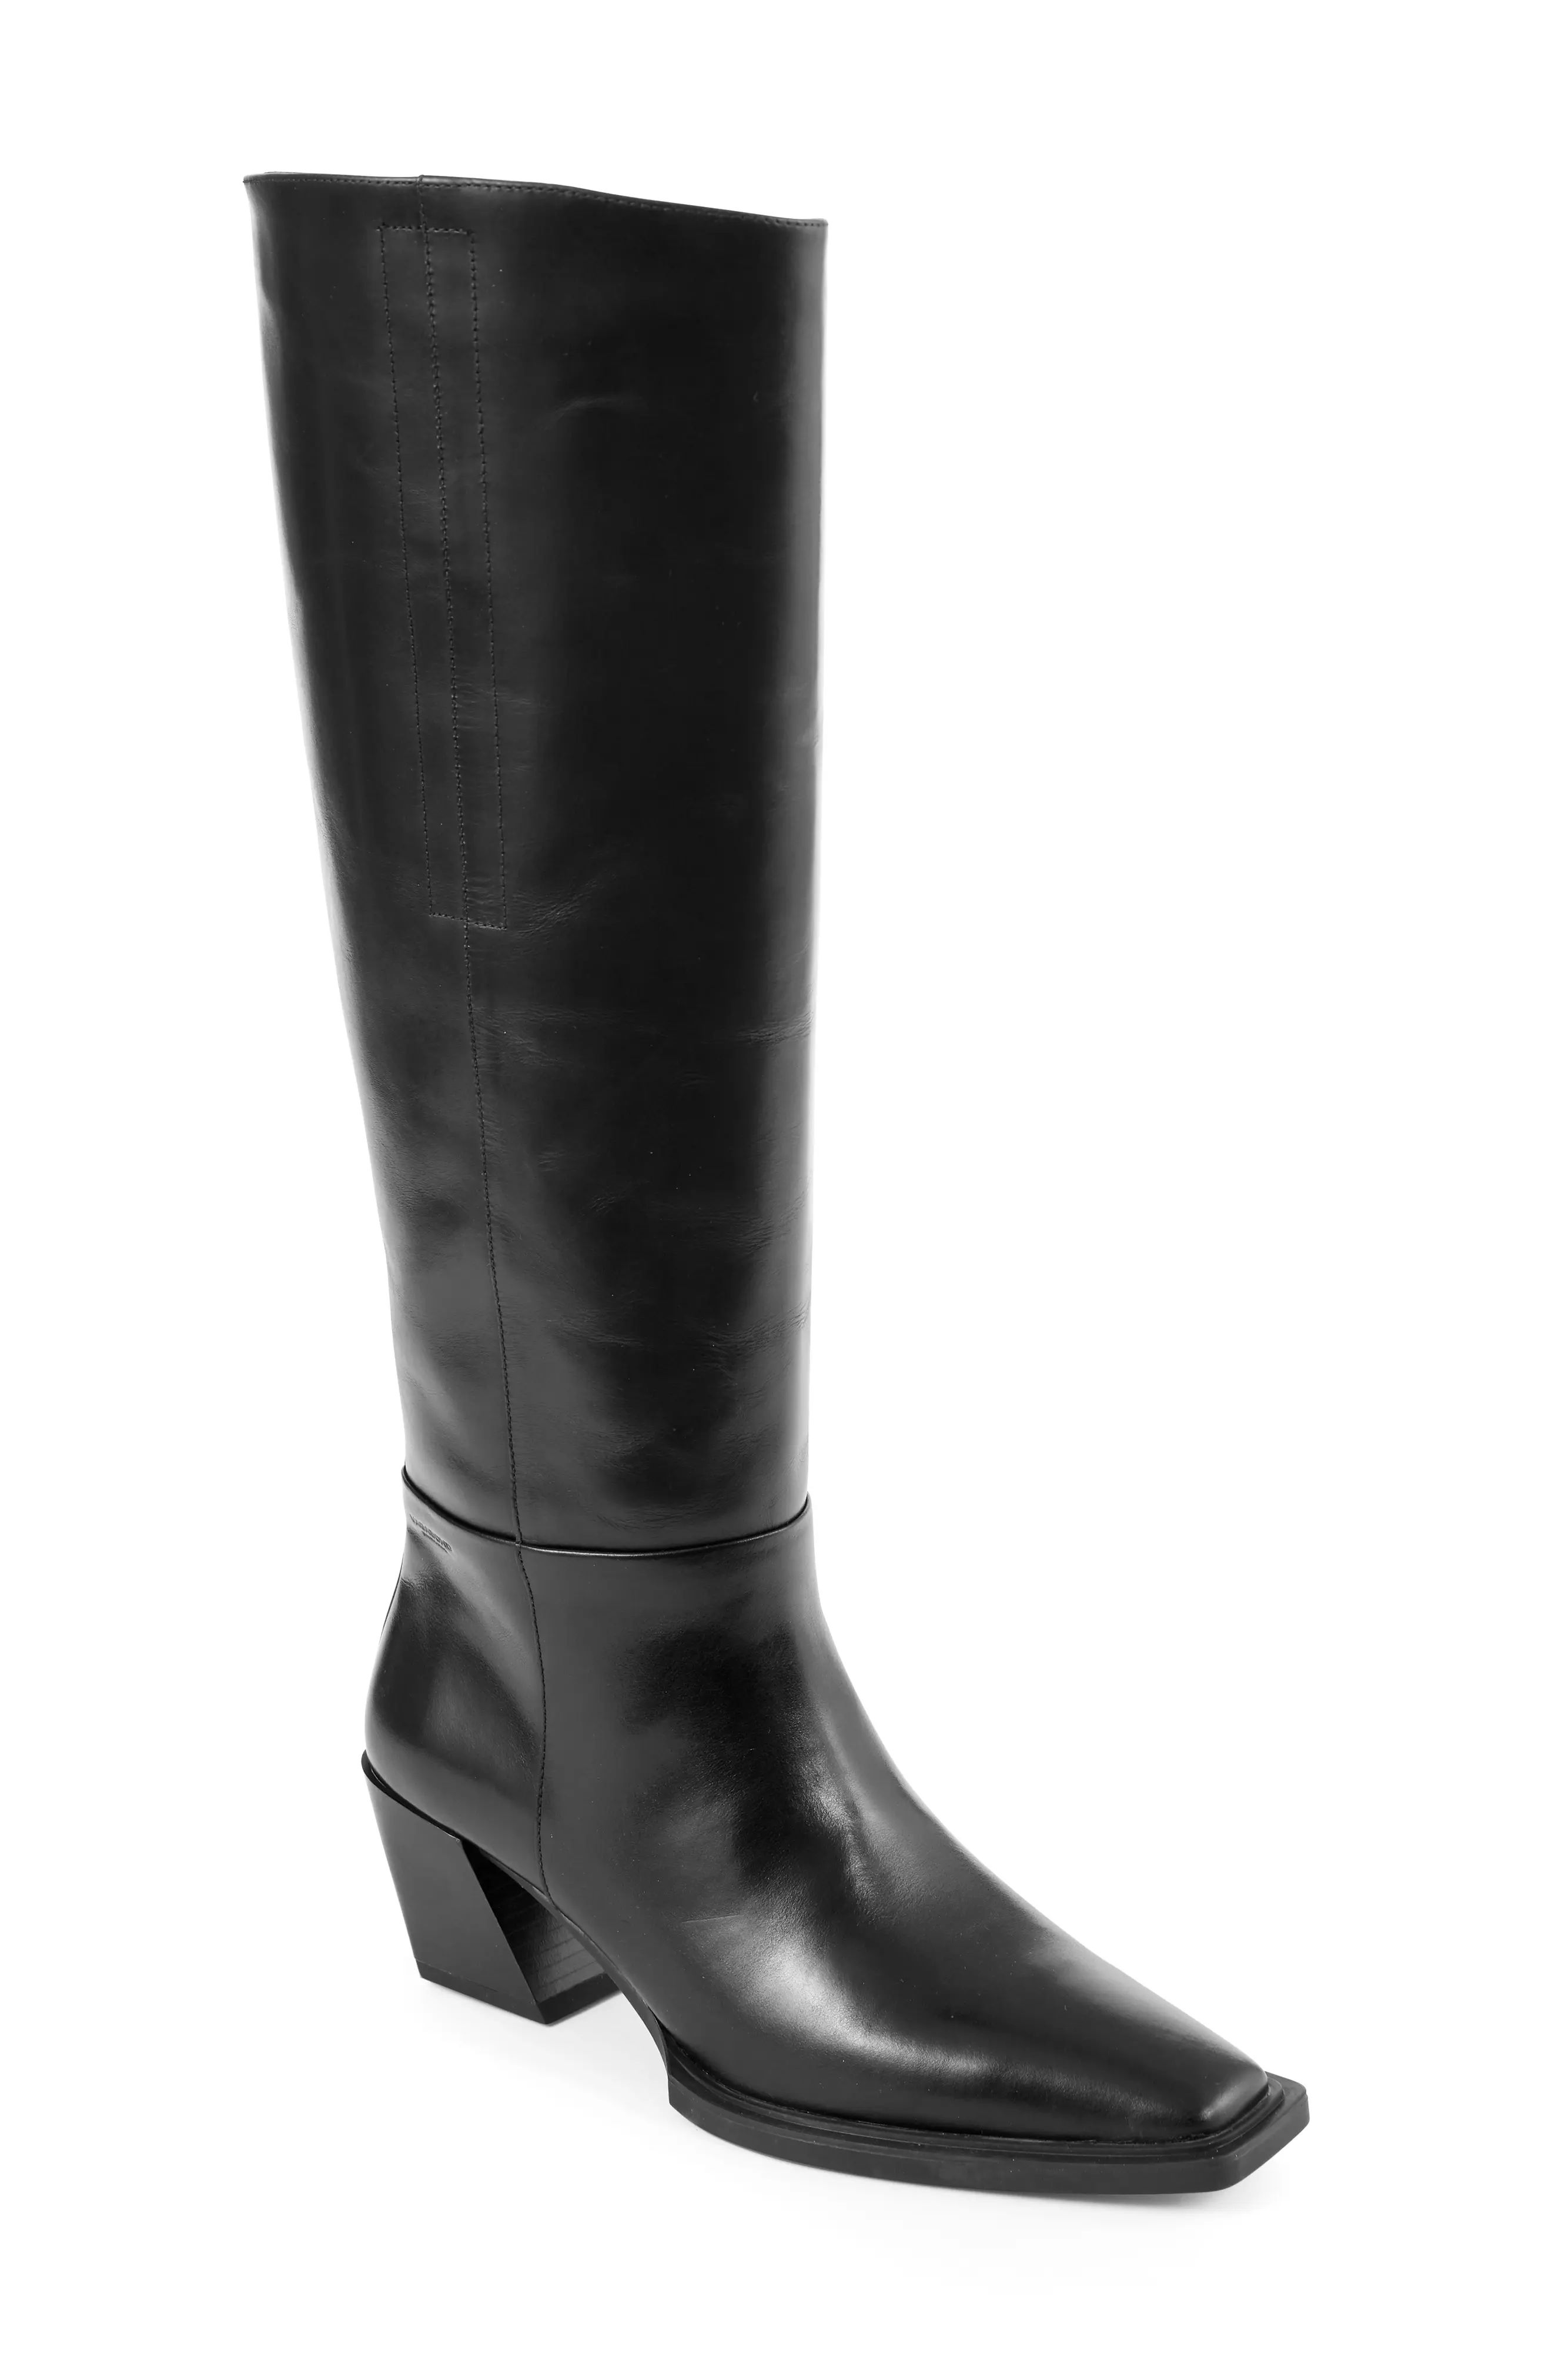 Vagabond Shoemakers Alina Knee High Boot, Size 8Us in Black at Nordstrom | Nordstrom